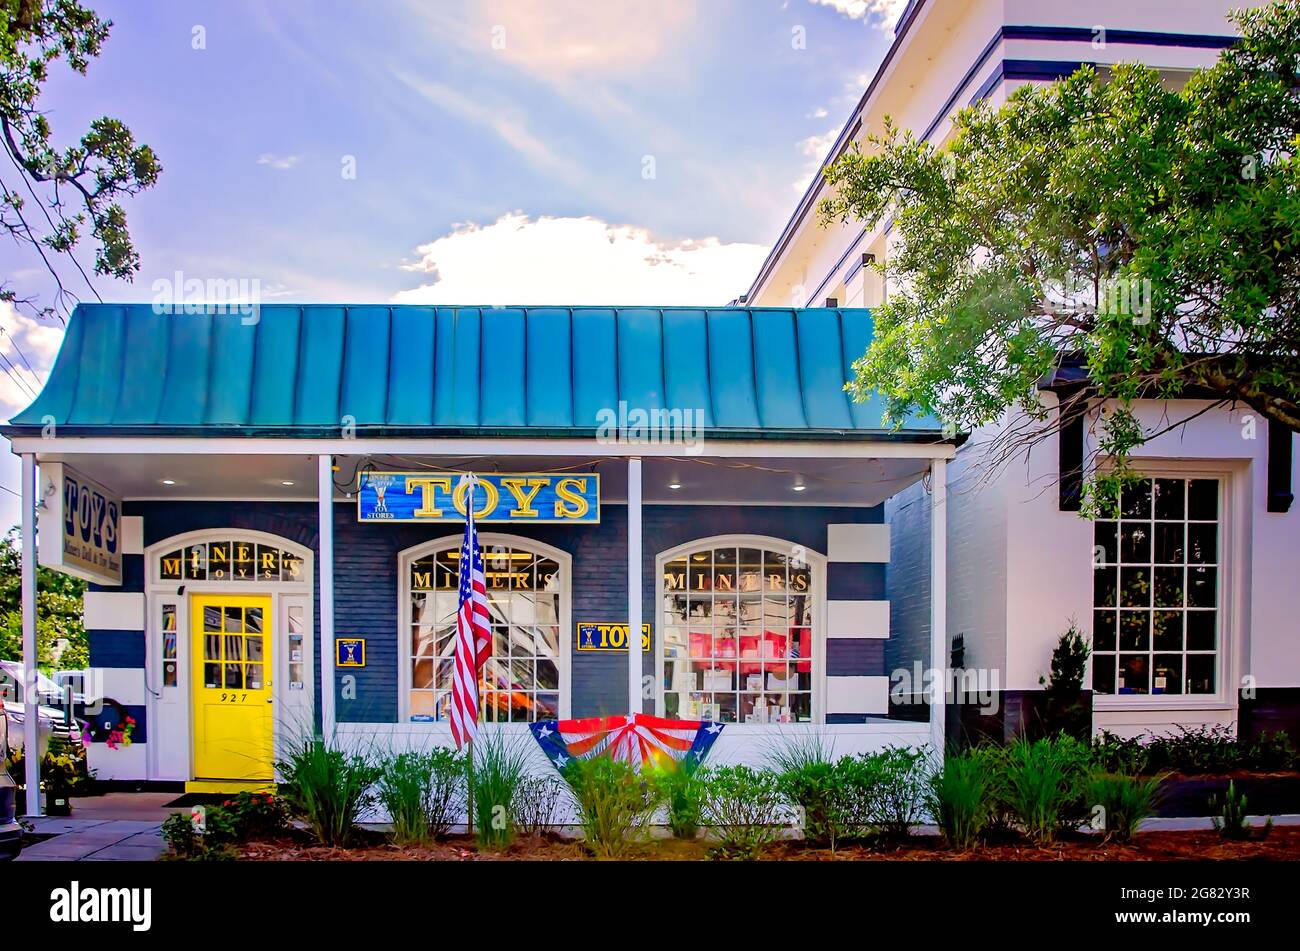 Miner’s Toys is pictured, July 4, 2021, in Ocean Springs, Mississippi. The family-owned toy store was founded in 1987 by John and Maryalice Miner. Stock Photo